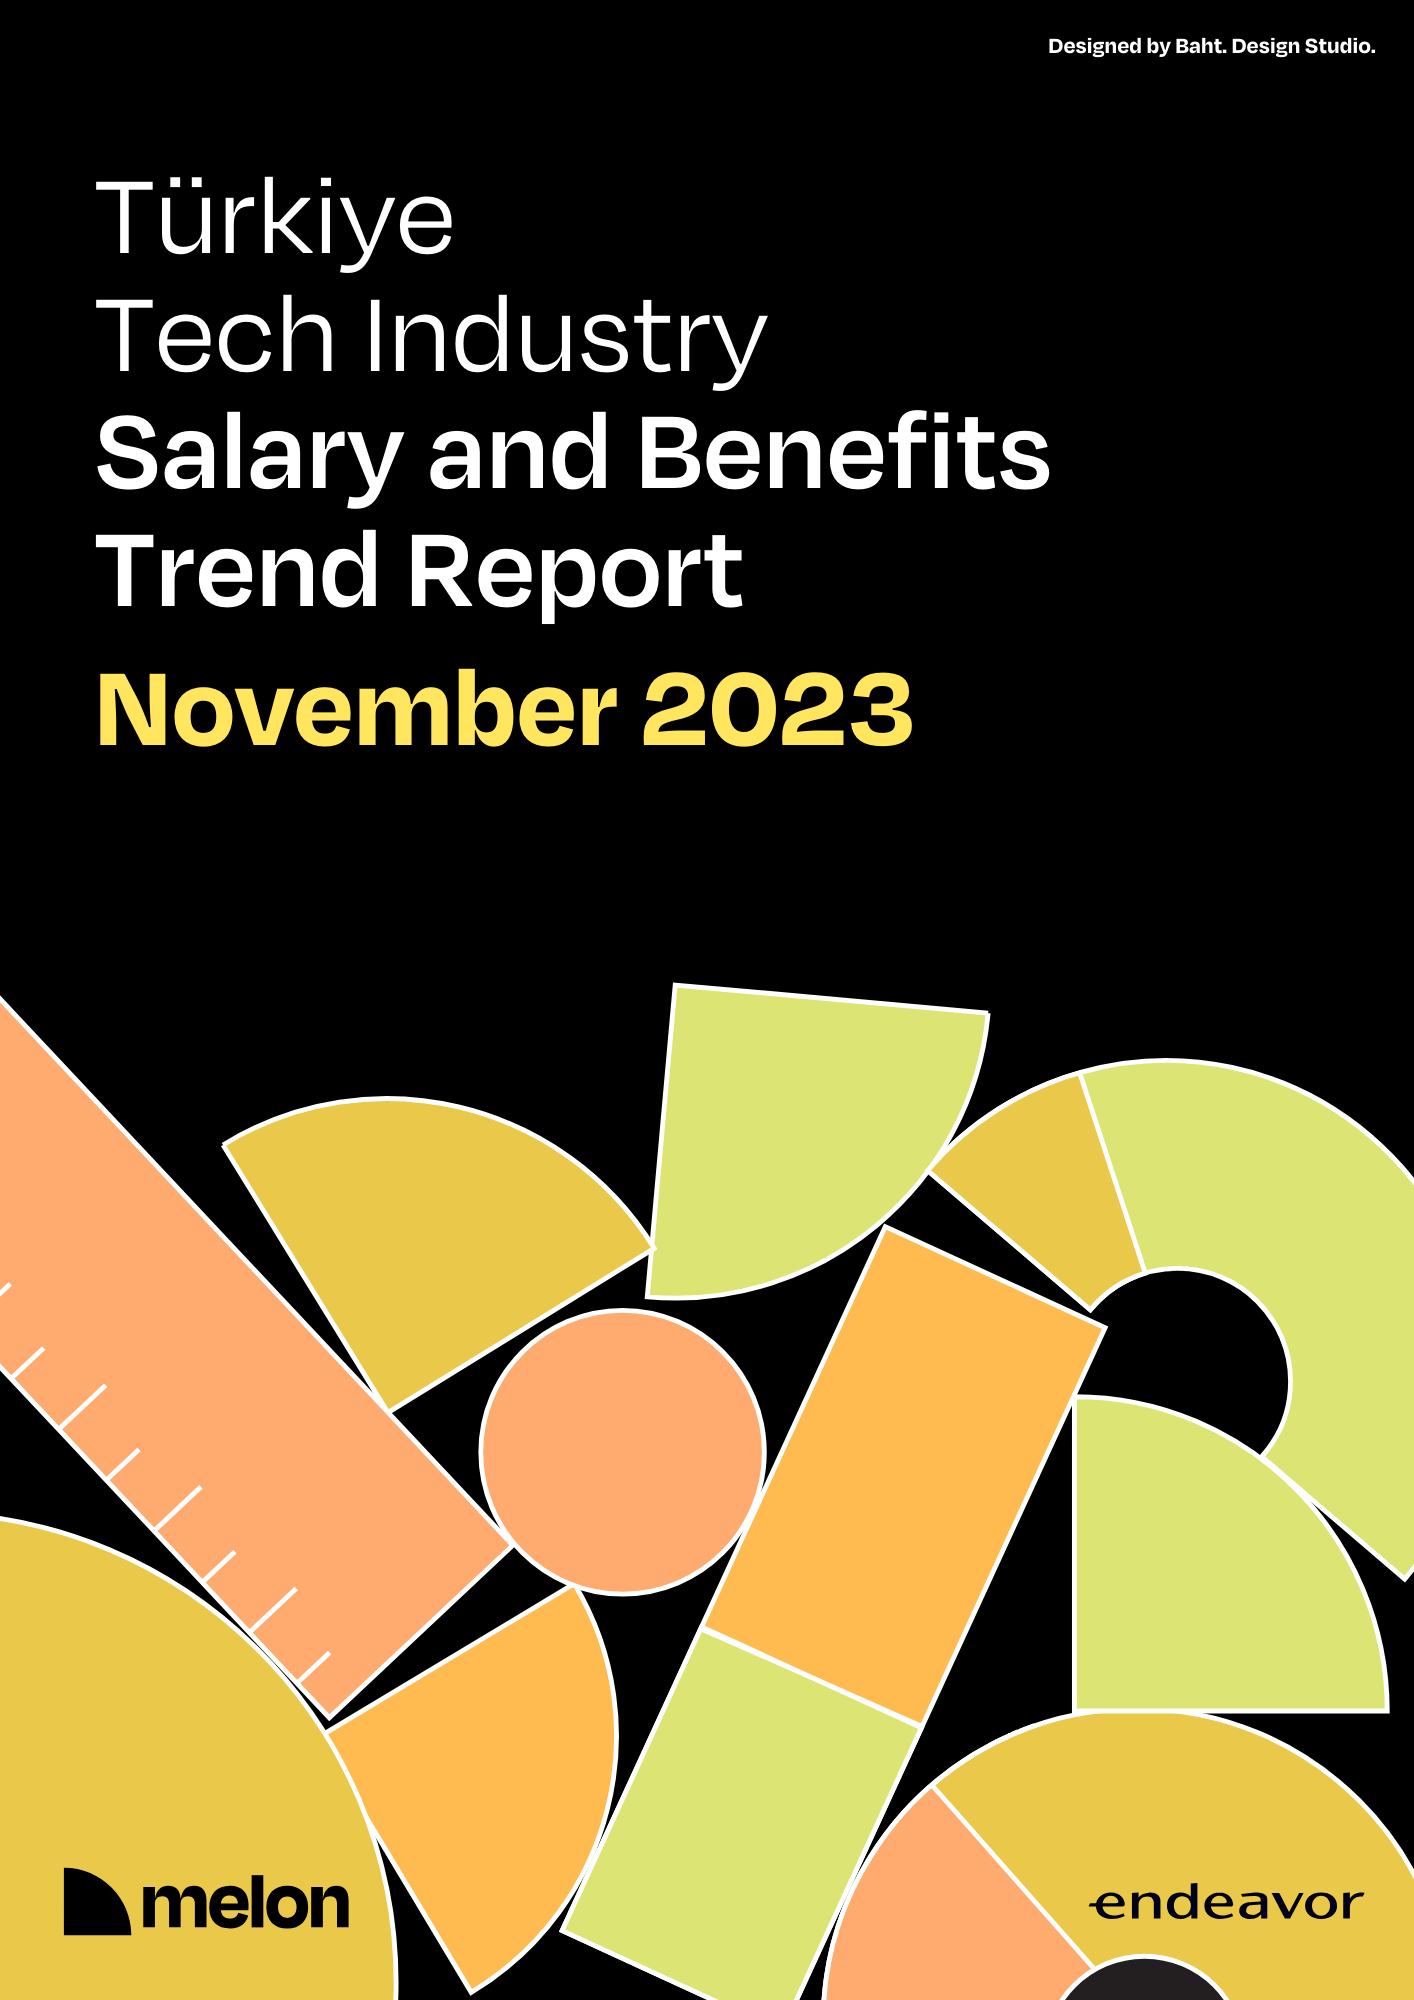 Free Download of the most recent benefits trend report